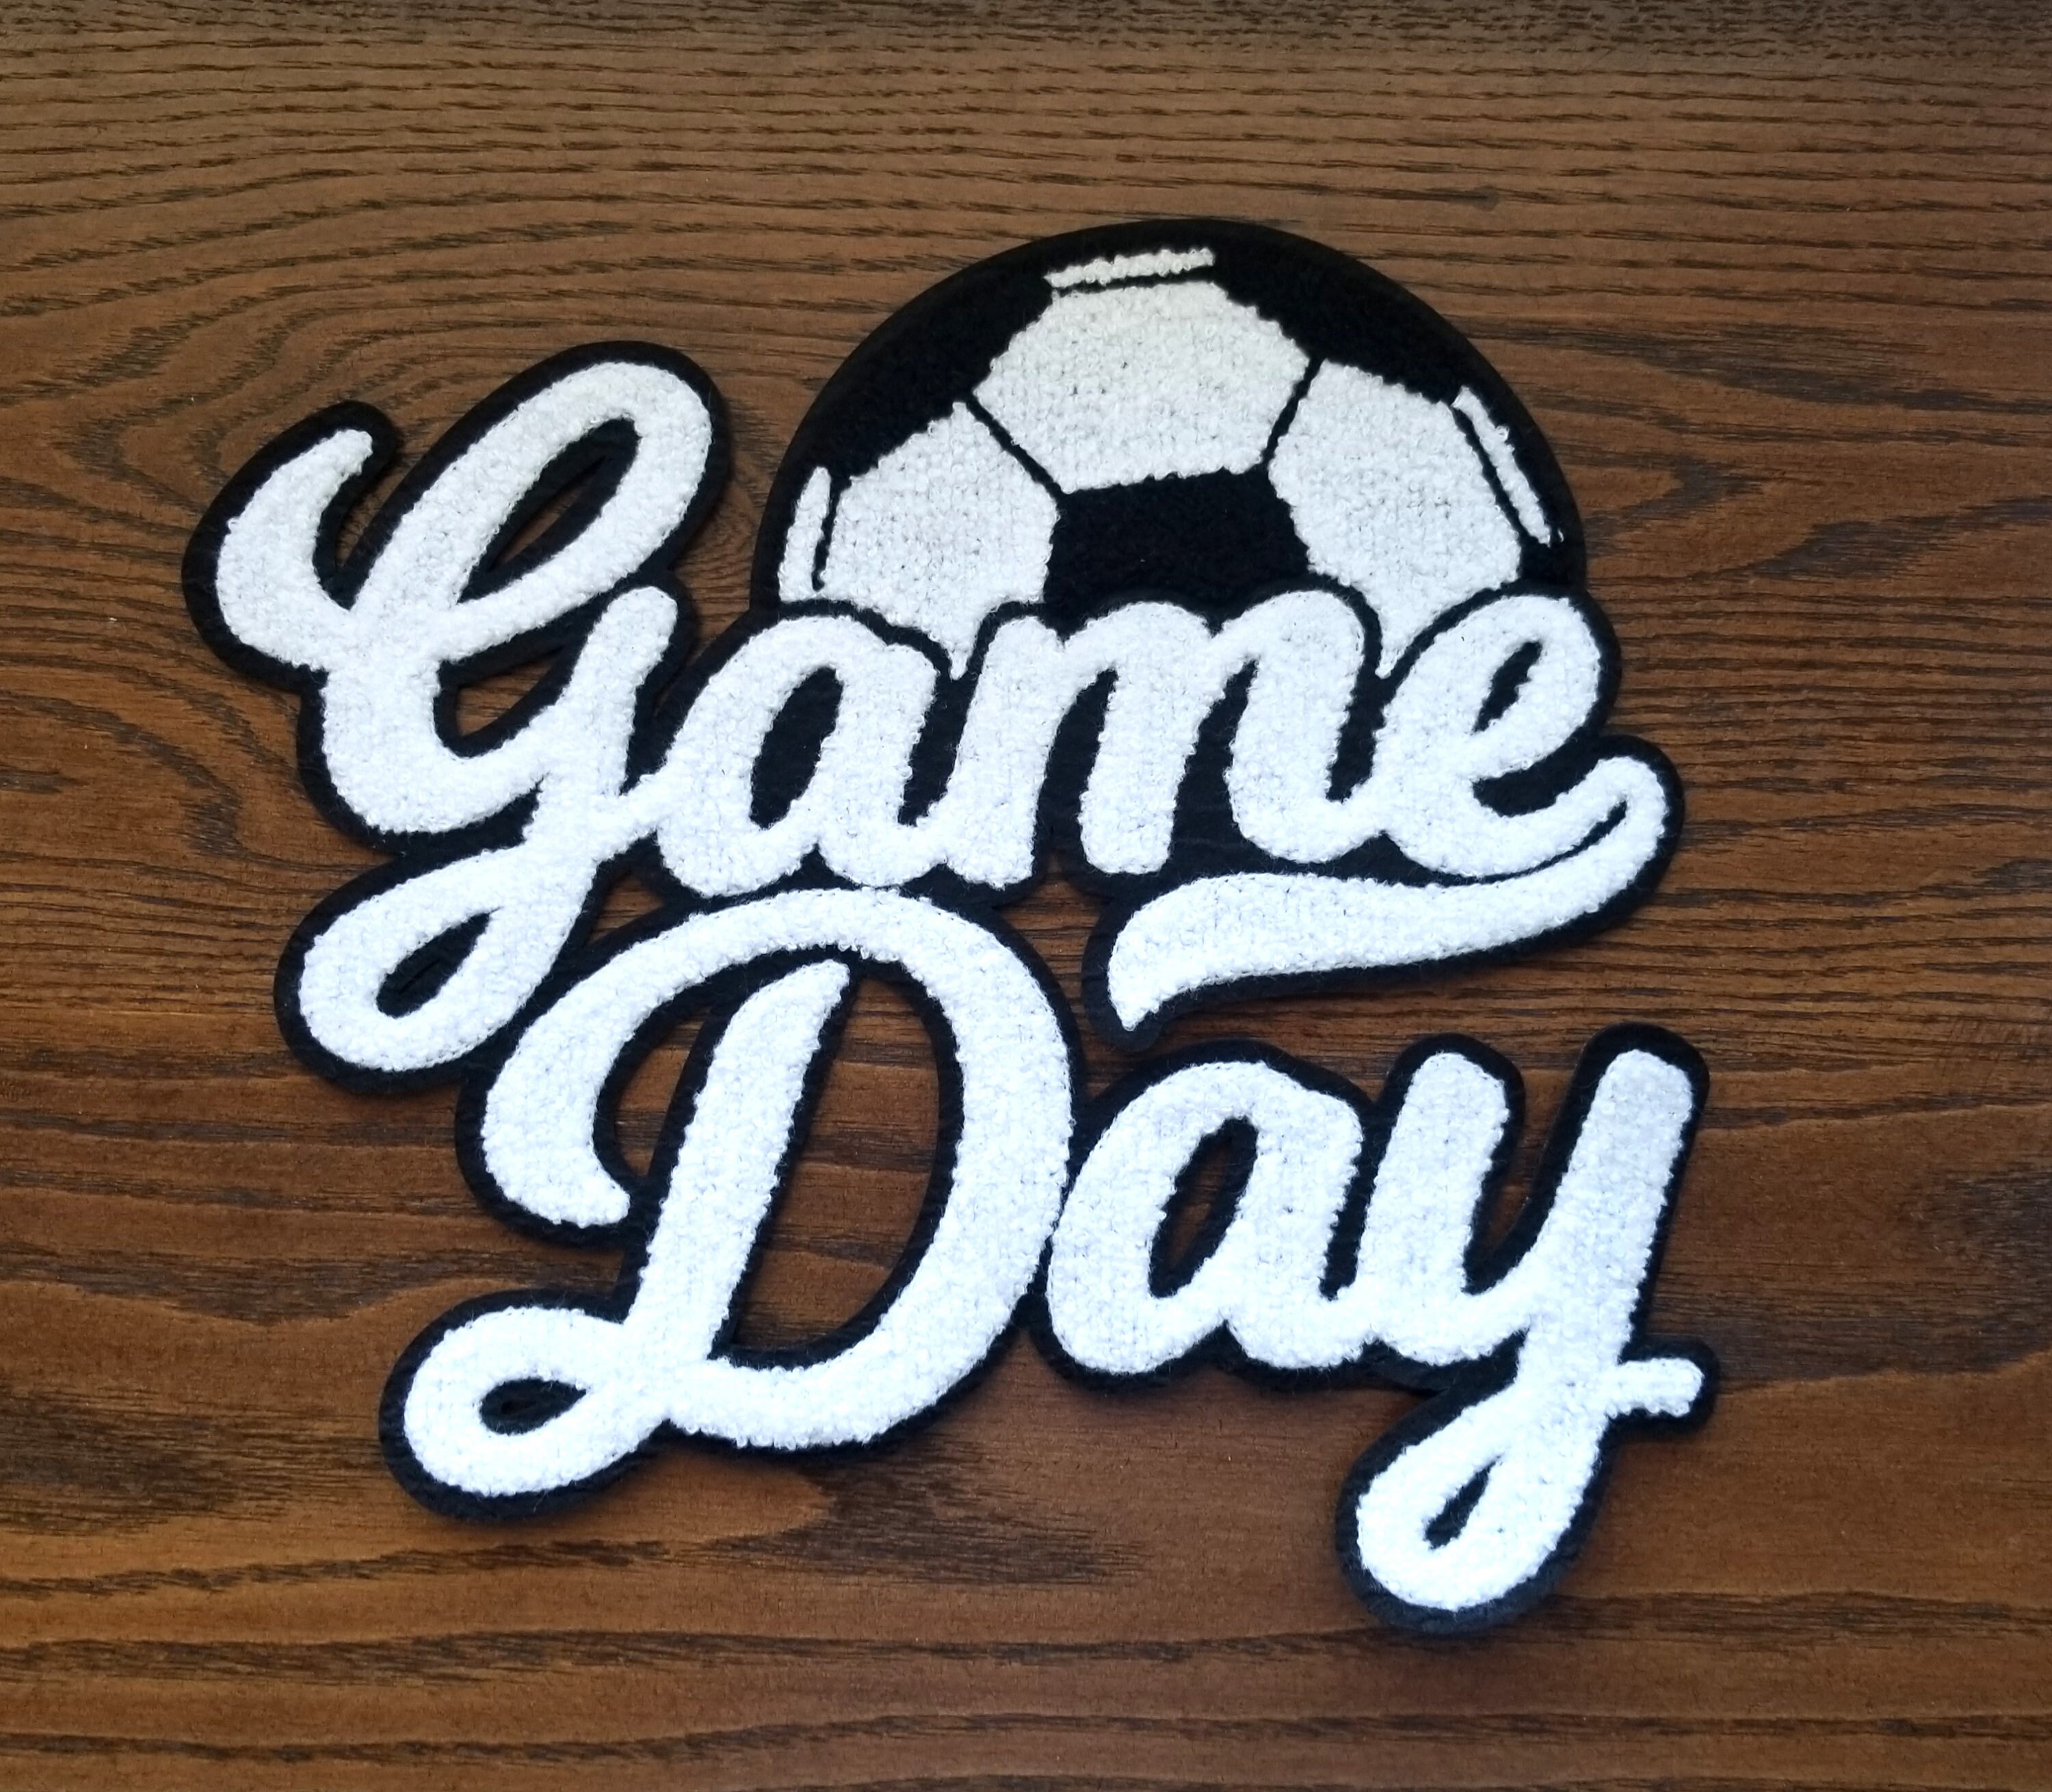 Football Soccer Personalized Iron on Patch Your Name Your Text Buy 3 Get 1  Free - Shop 24PlanetsStudio Knitting, Embroidery, Felted Wool & Sewing -  Pinkoi